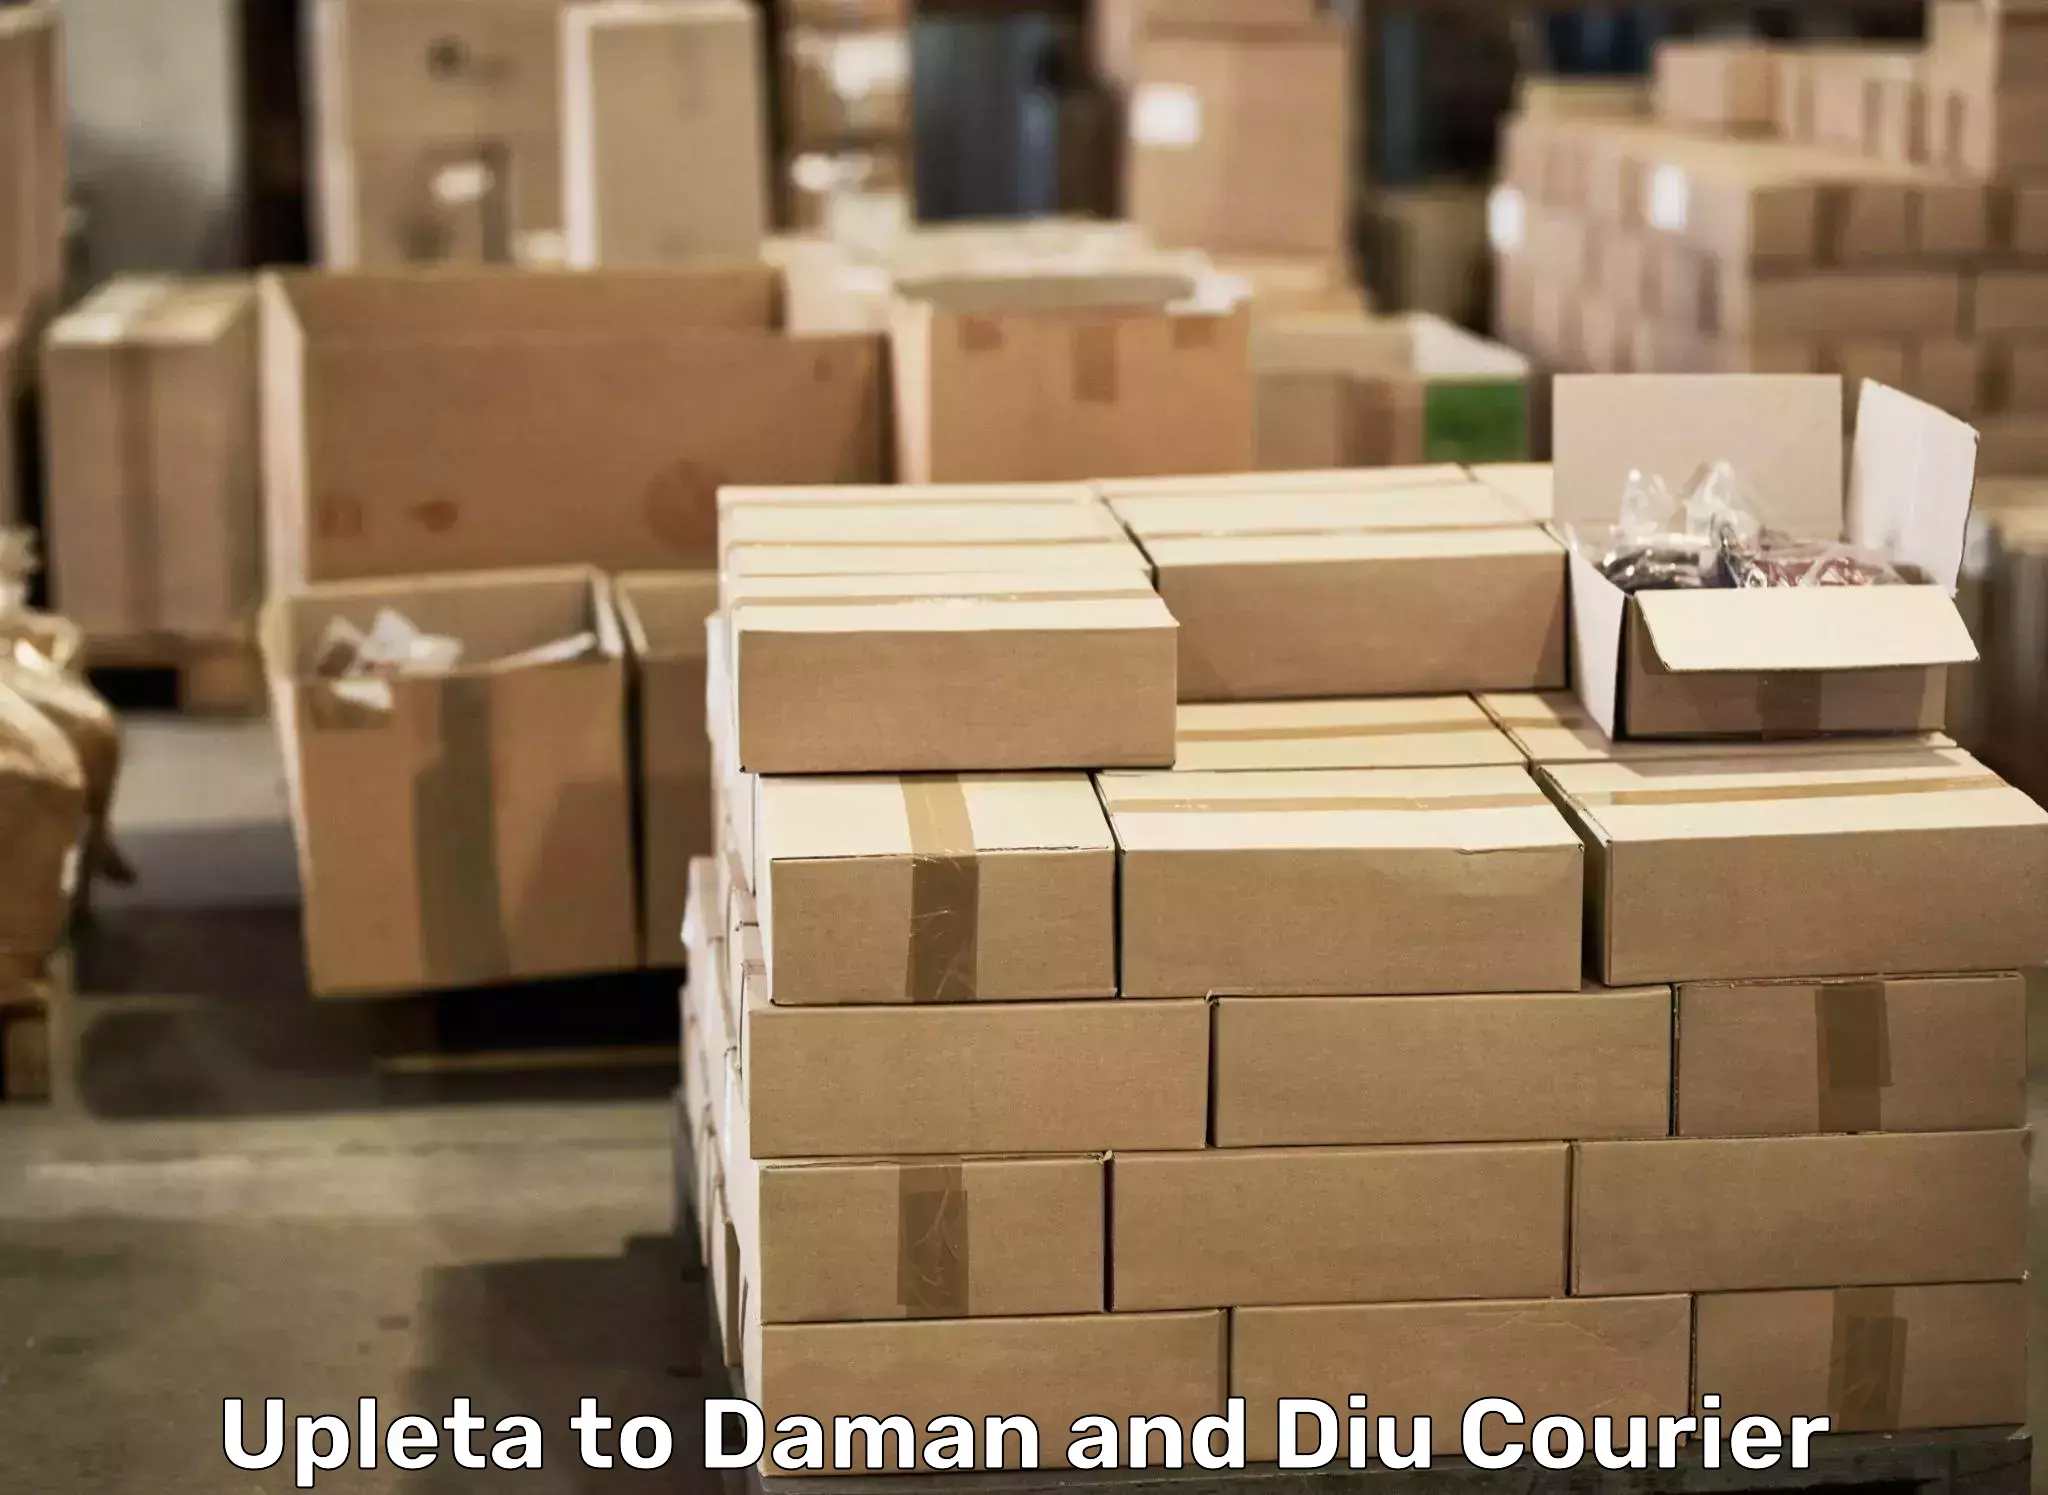 Affordable household movers Upleta to Daman and Diu